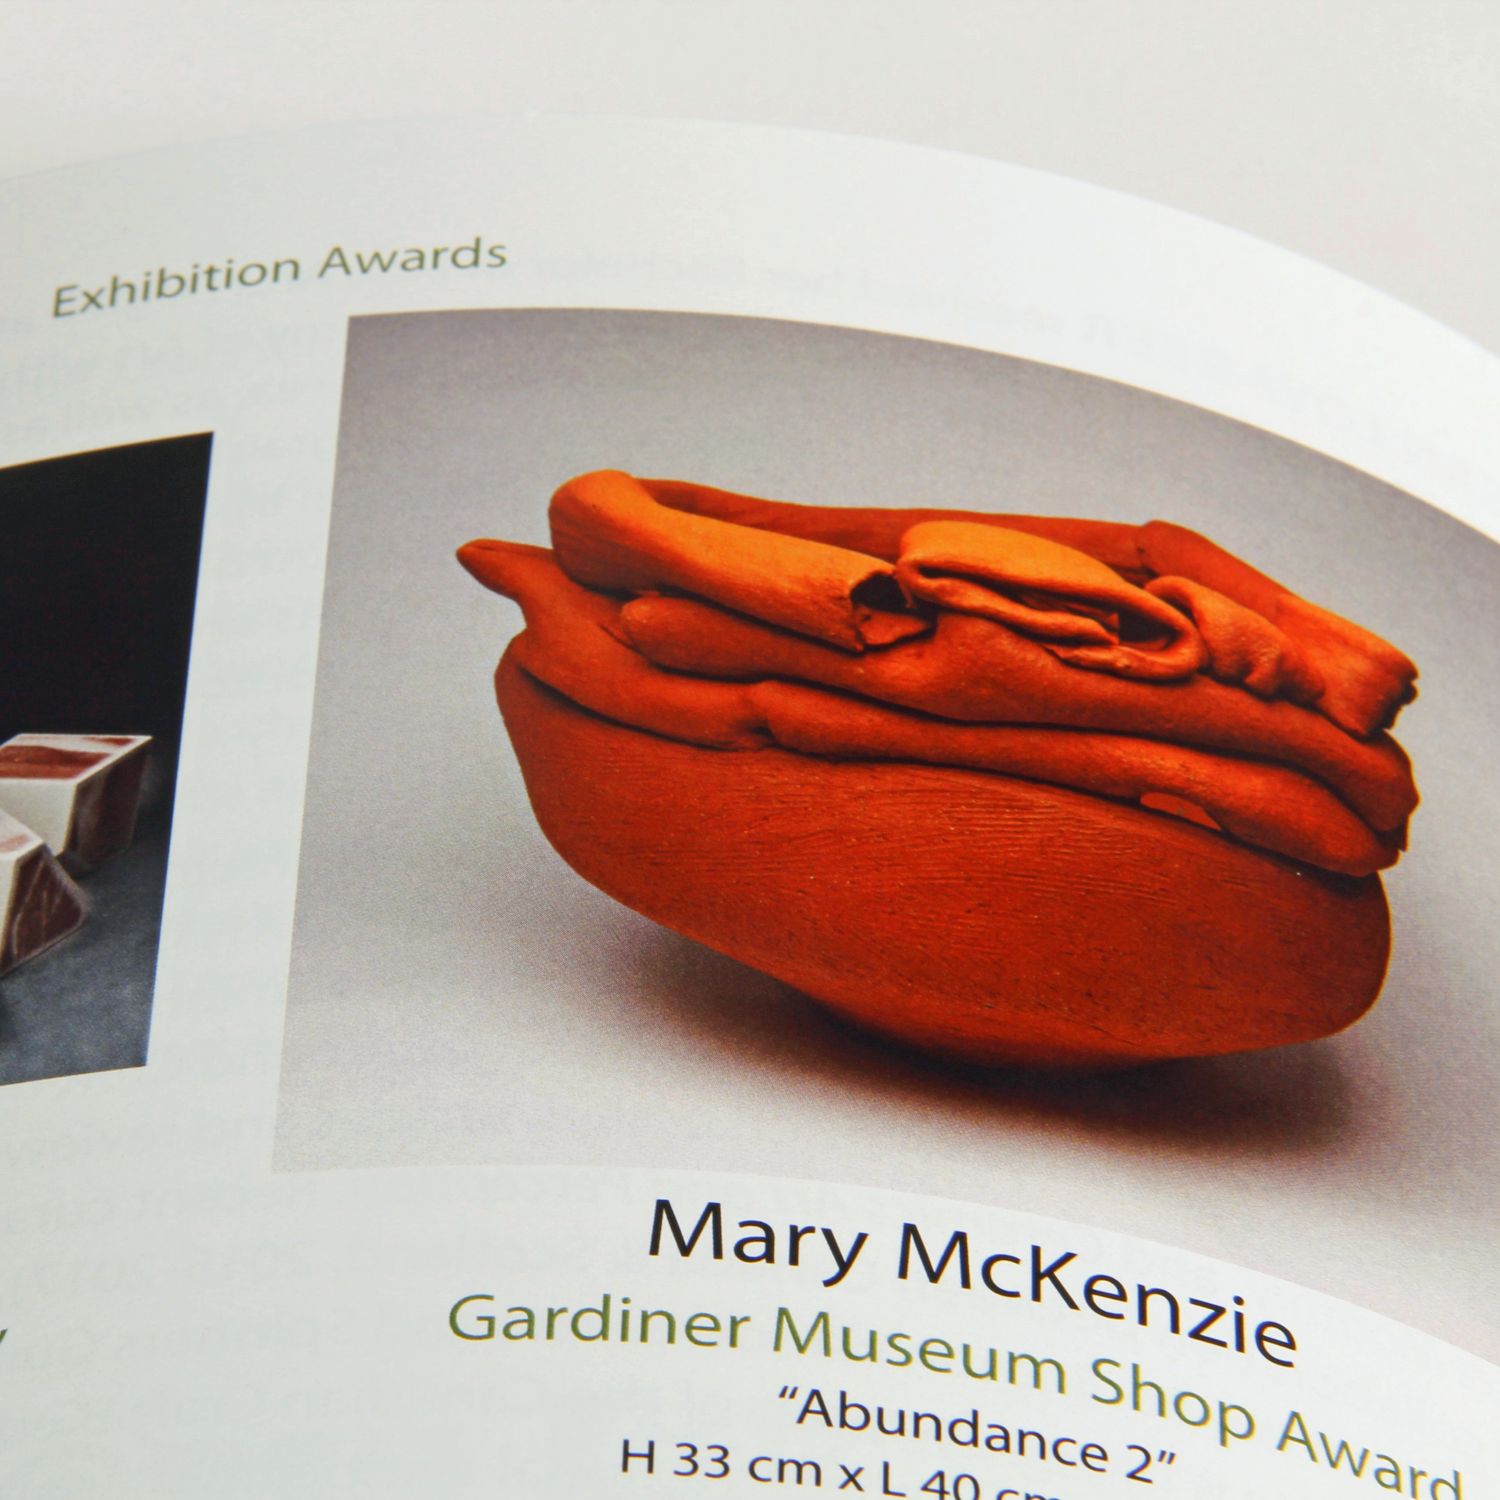 21 st Biennial Exhibition: Toronto Potters Catalogue Product Image 5 of 6